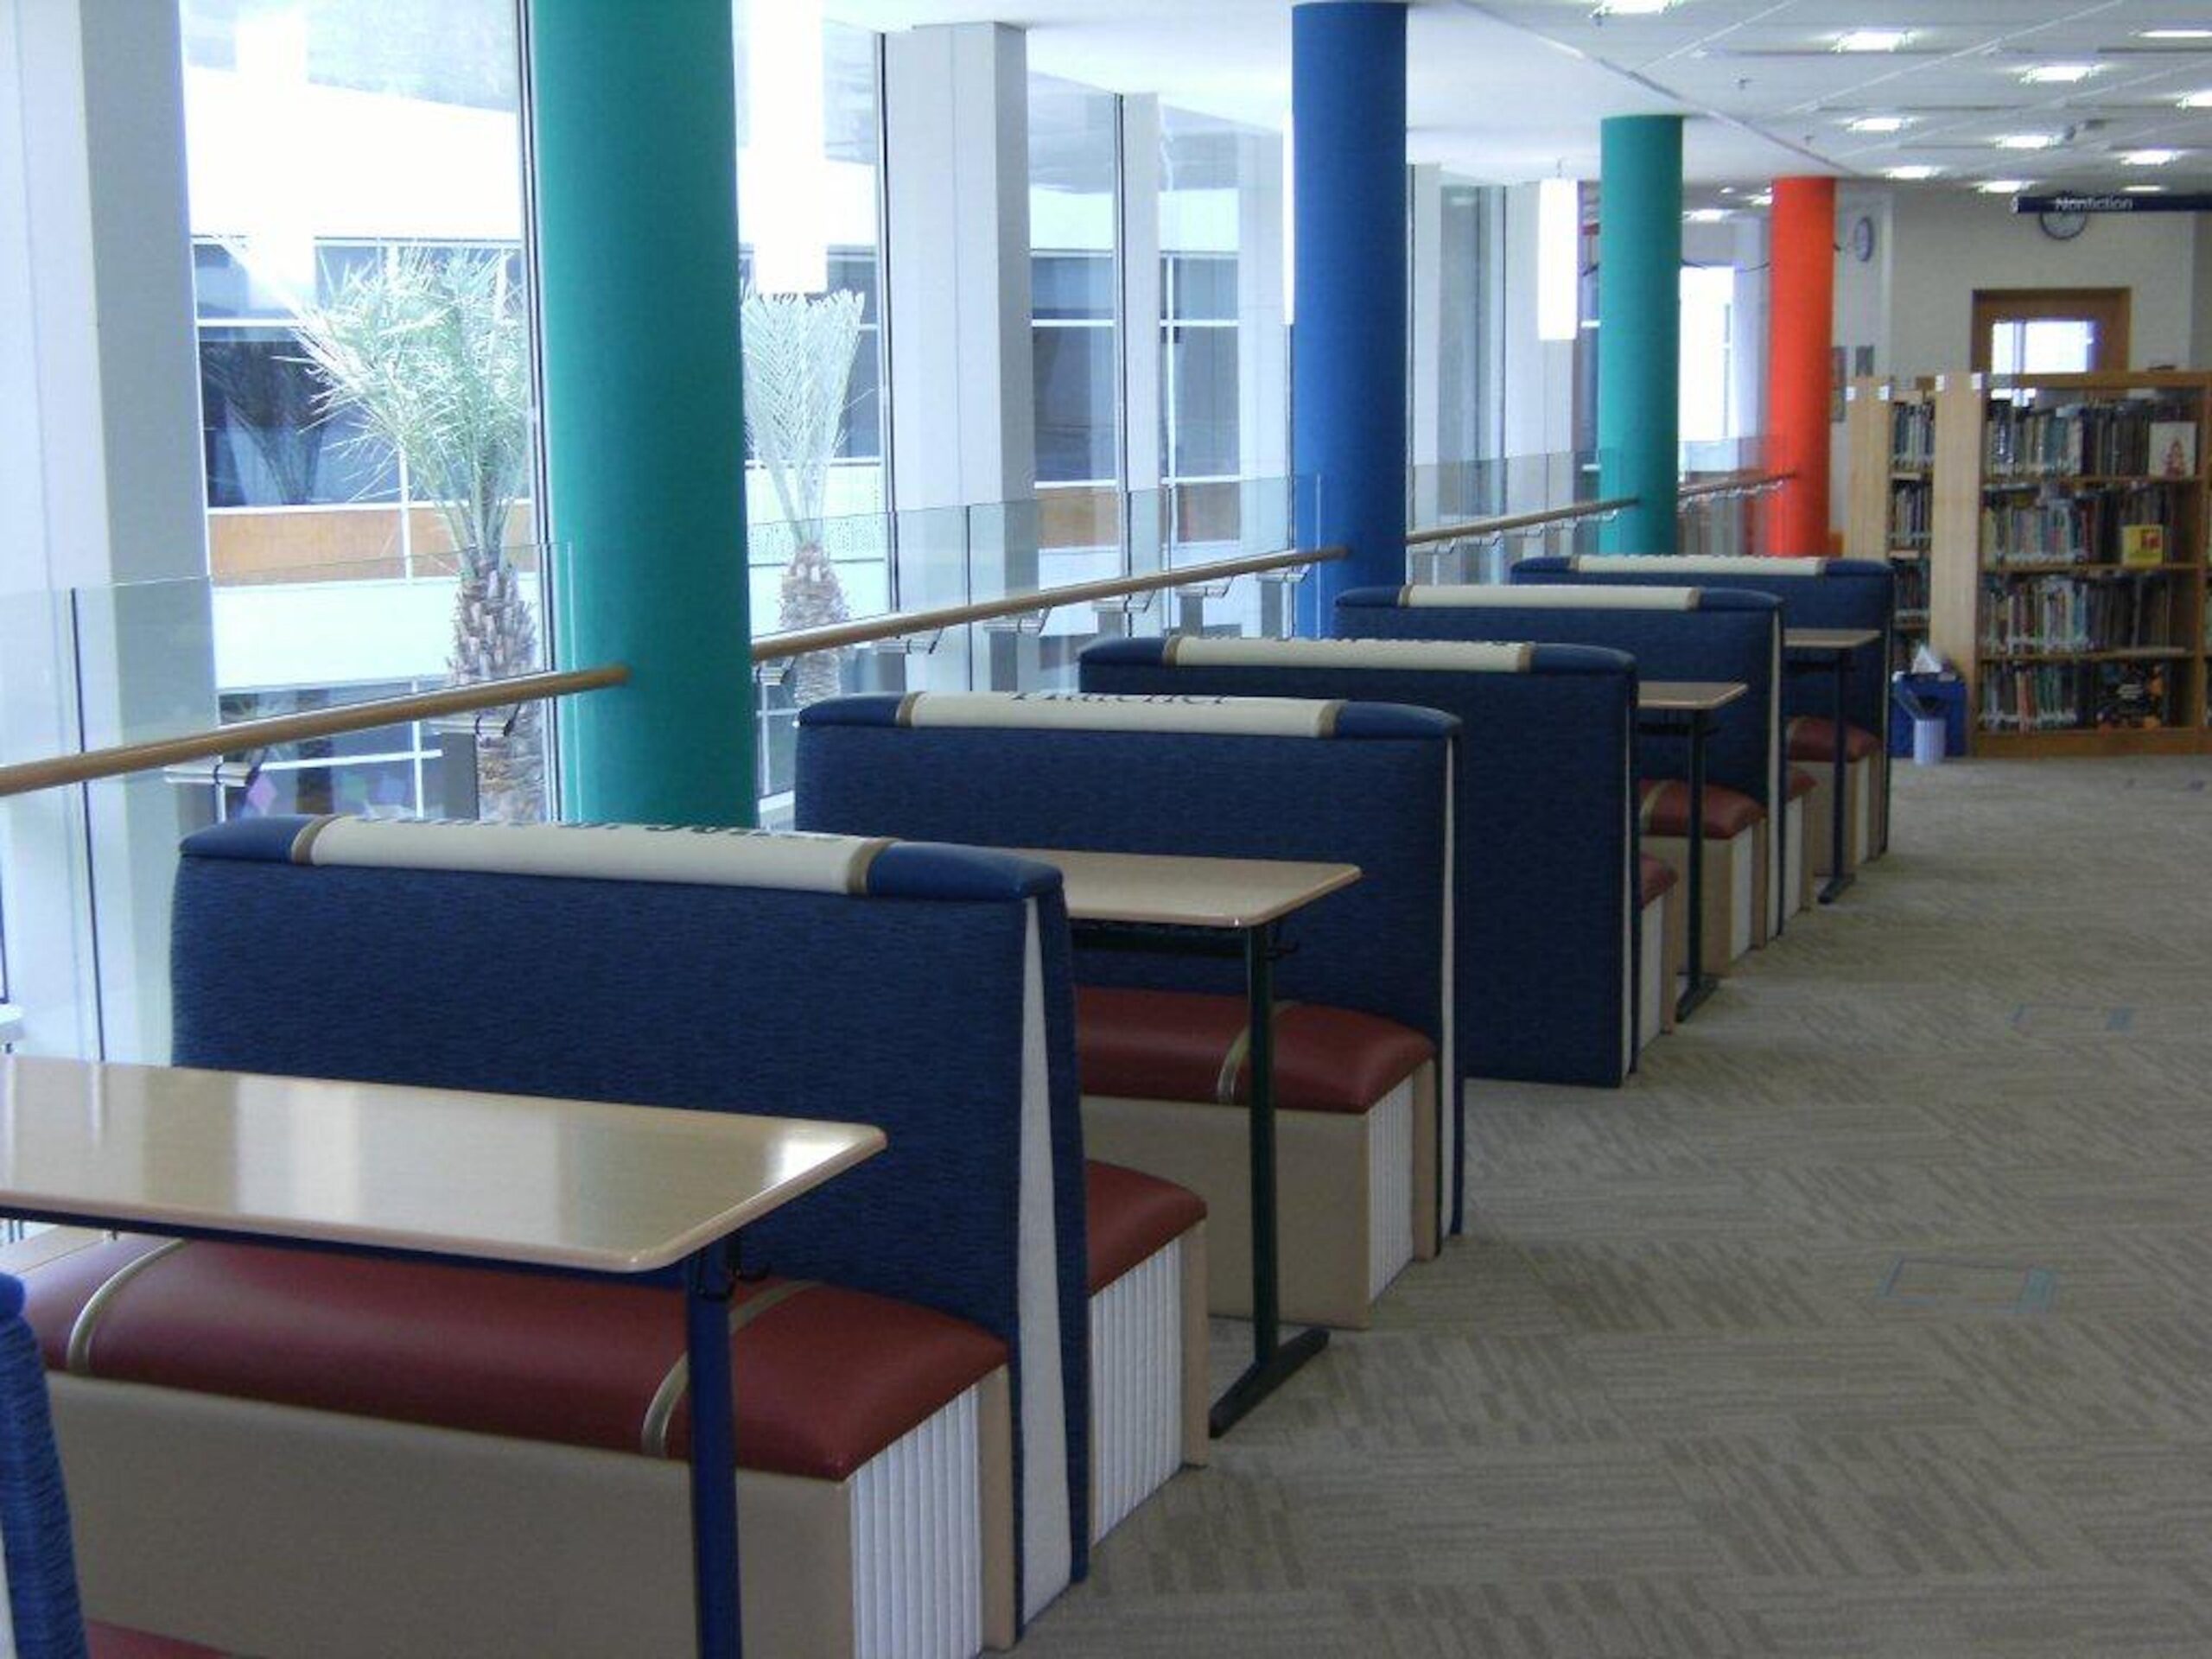 Childrens library furniture